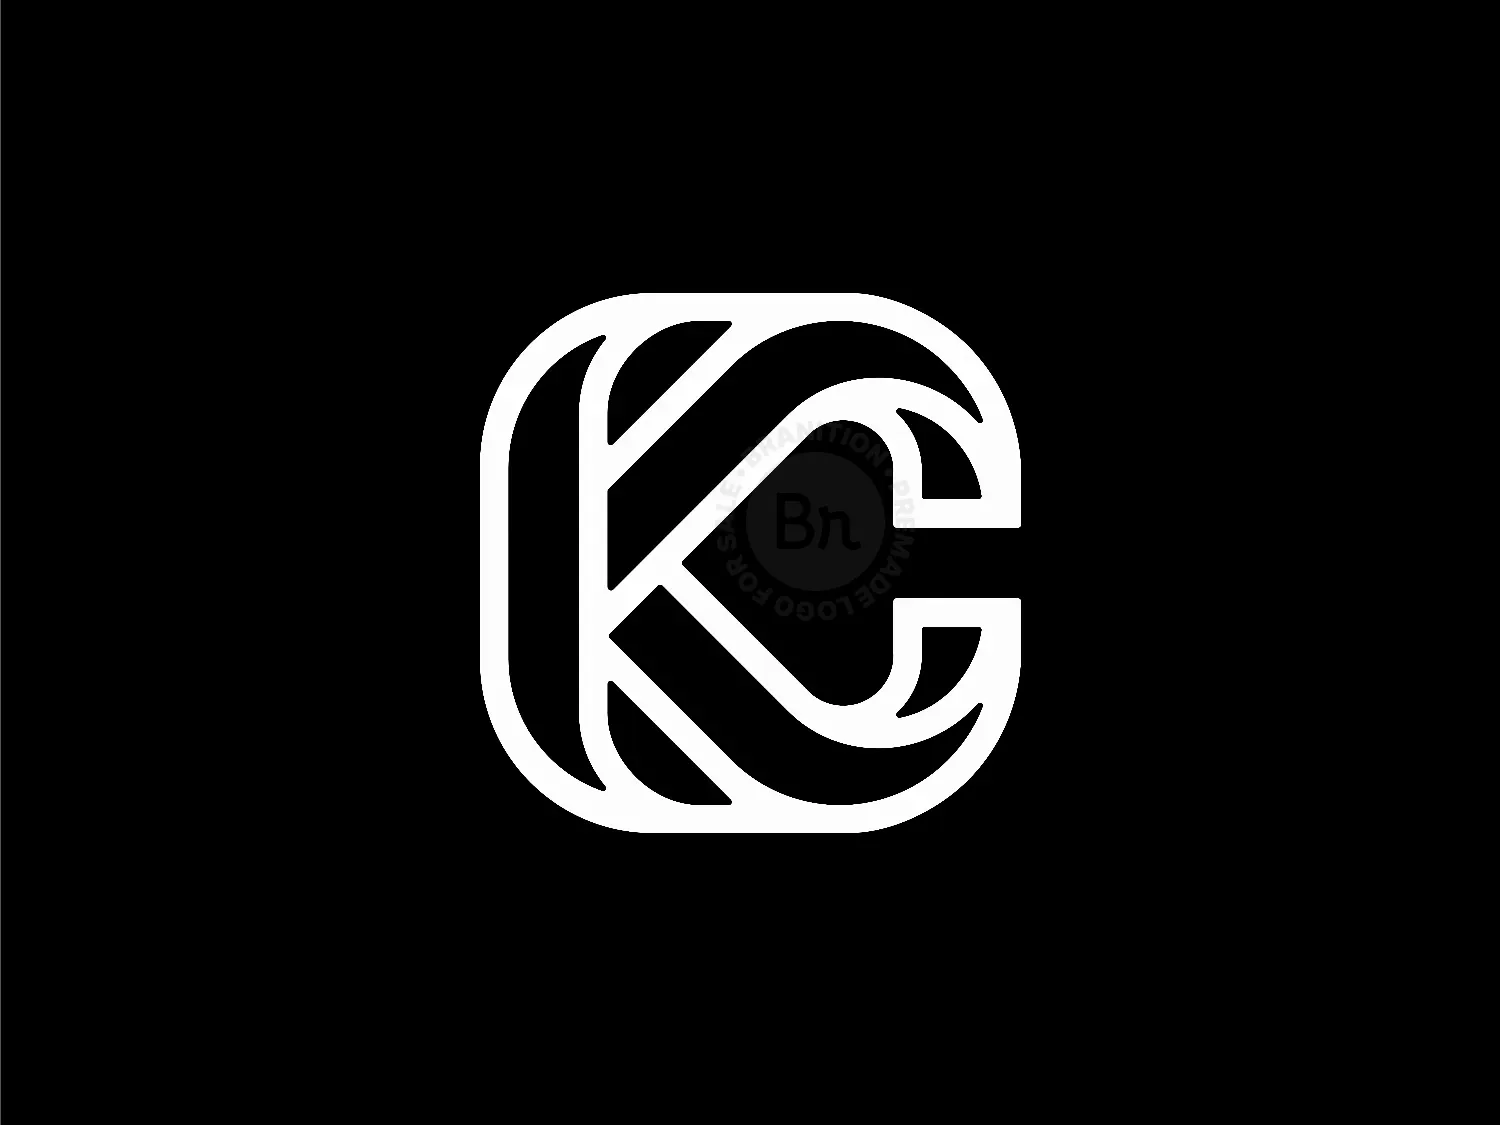 Design a classy logo for kc products and holdings | Logo design contest |  99designs